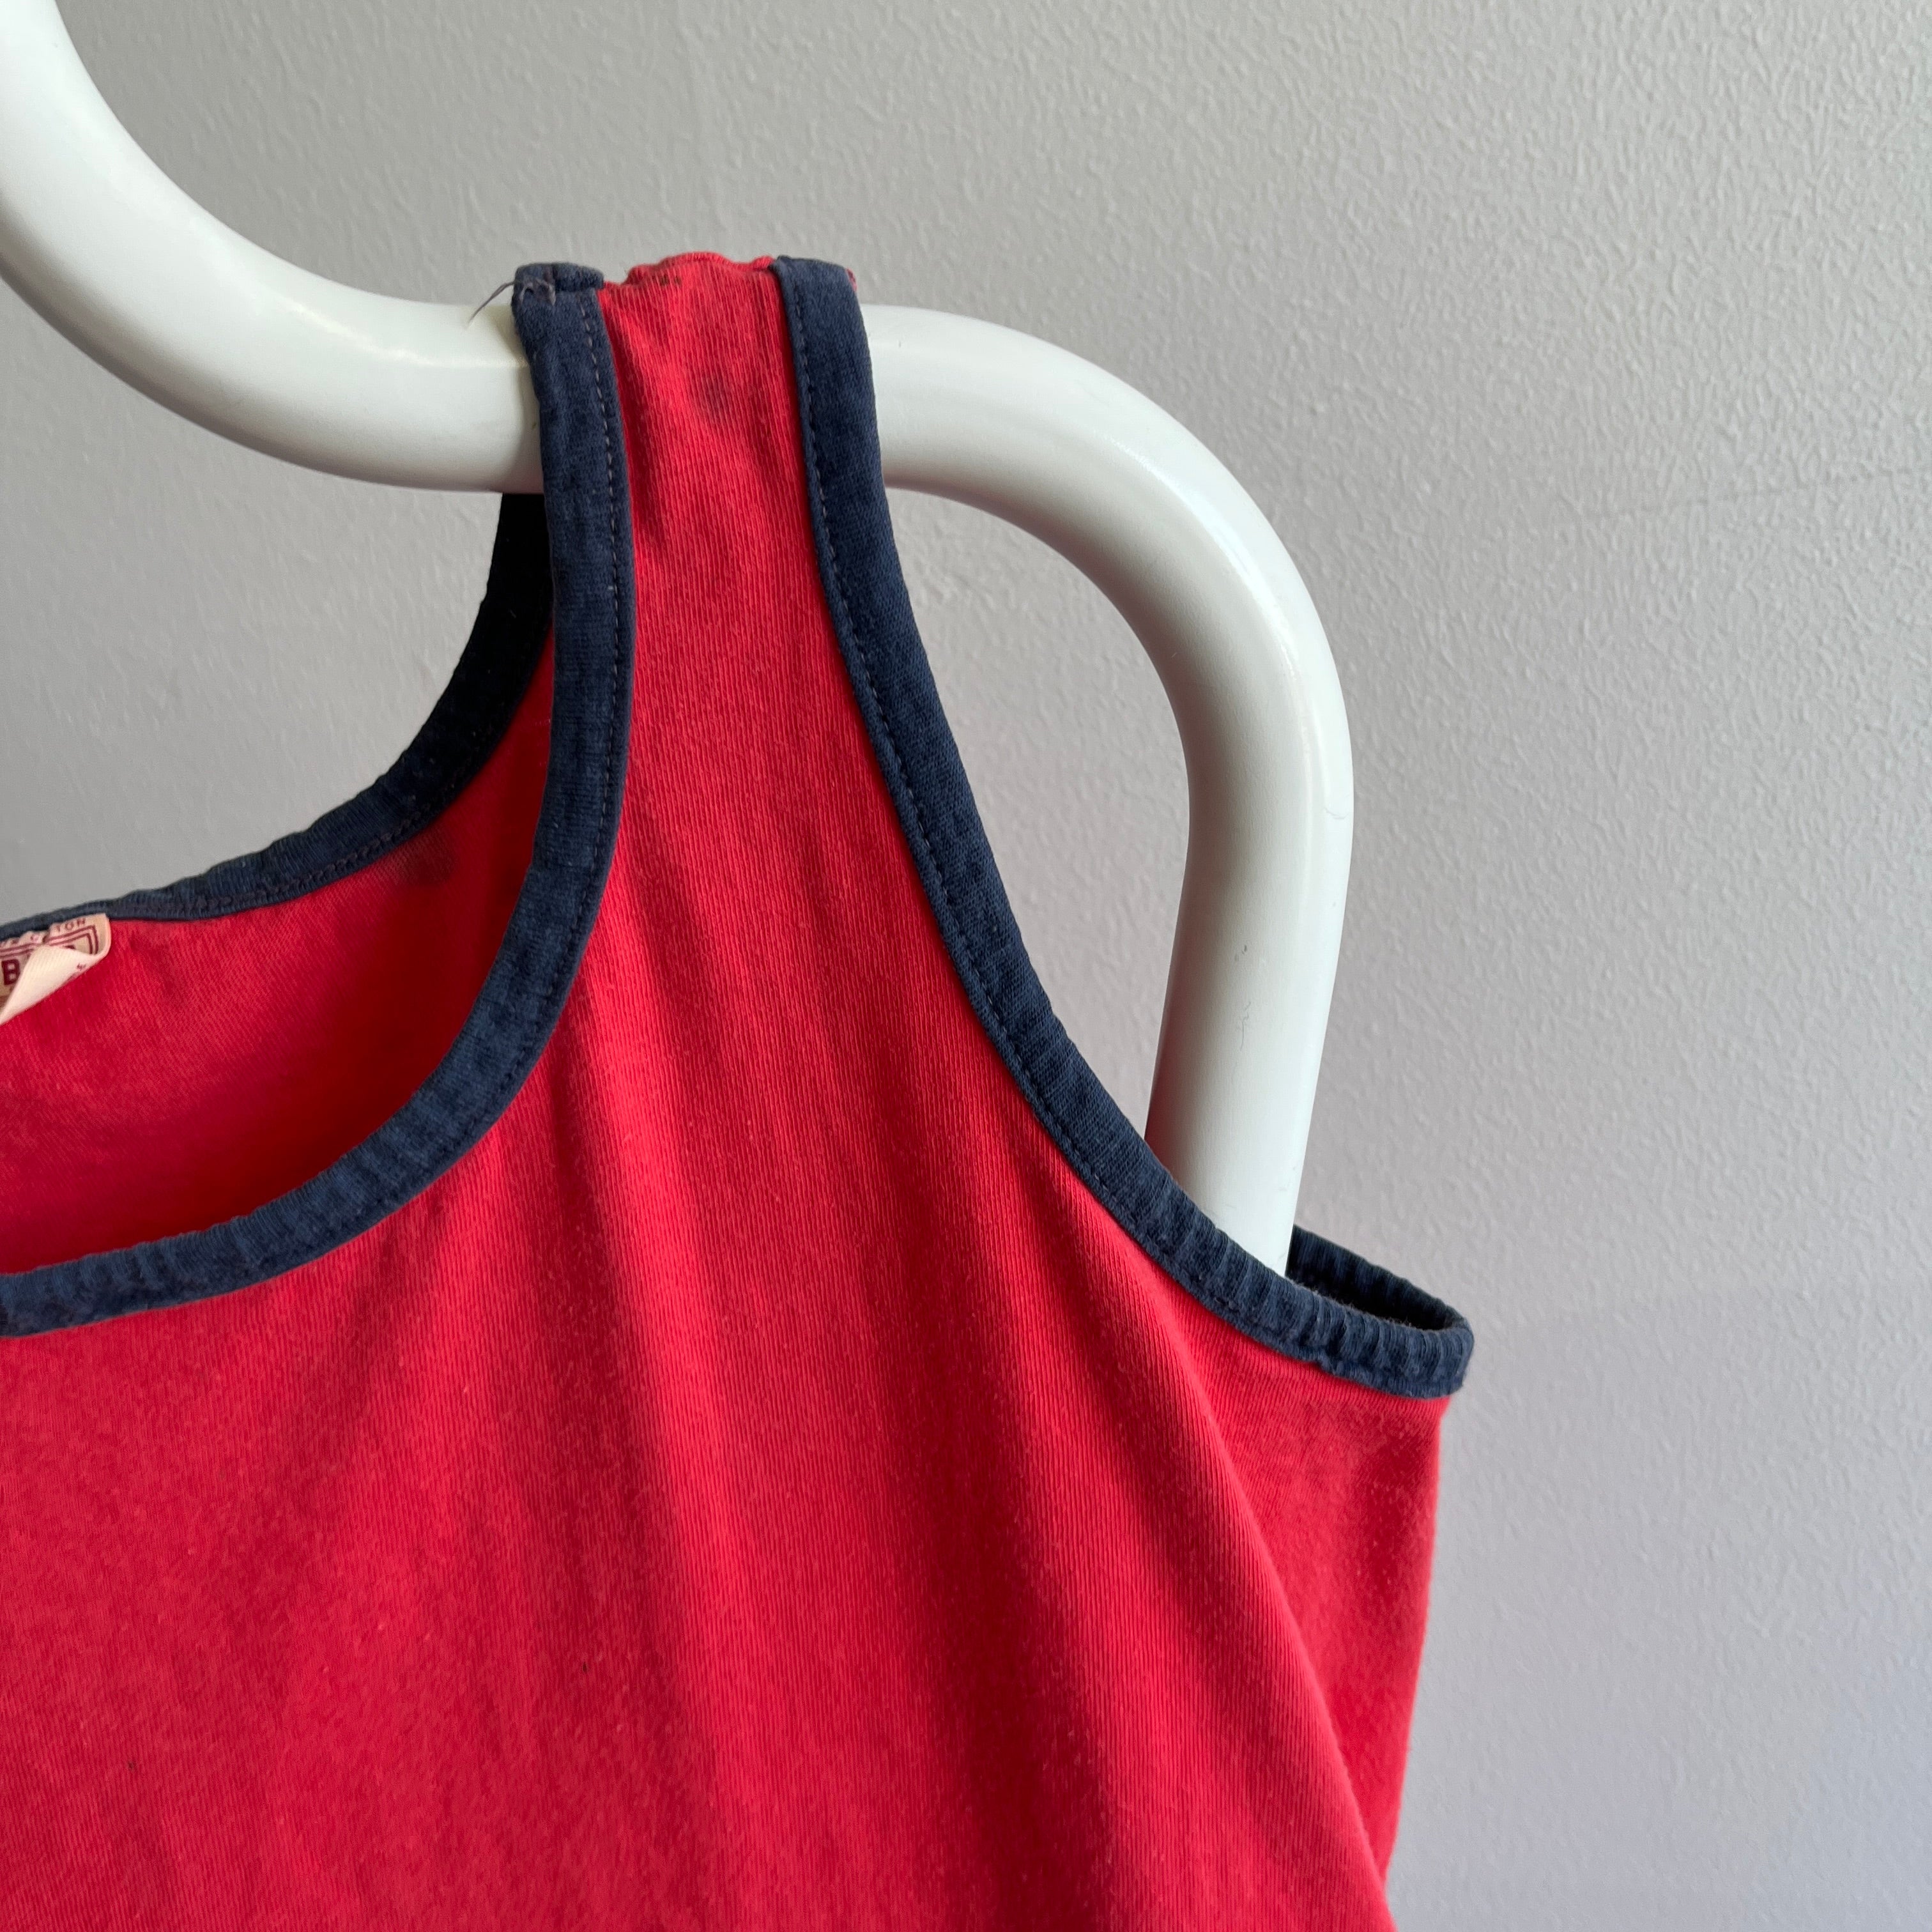 1970s BVD Two Tone Perfectly Stained Cotton Tank Top